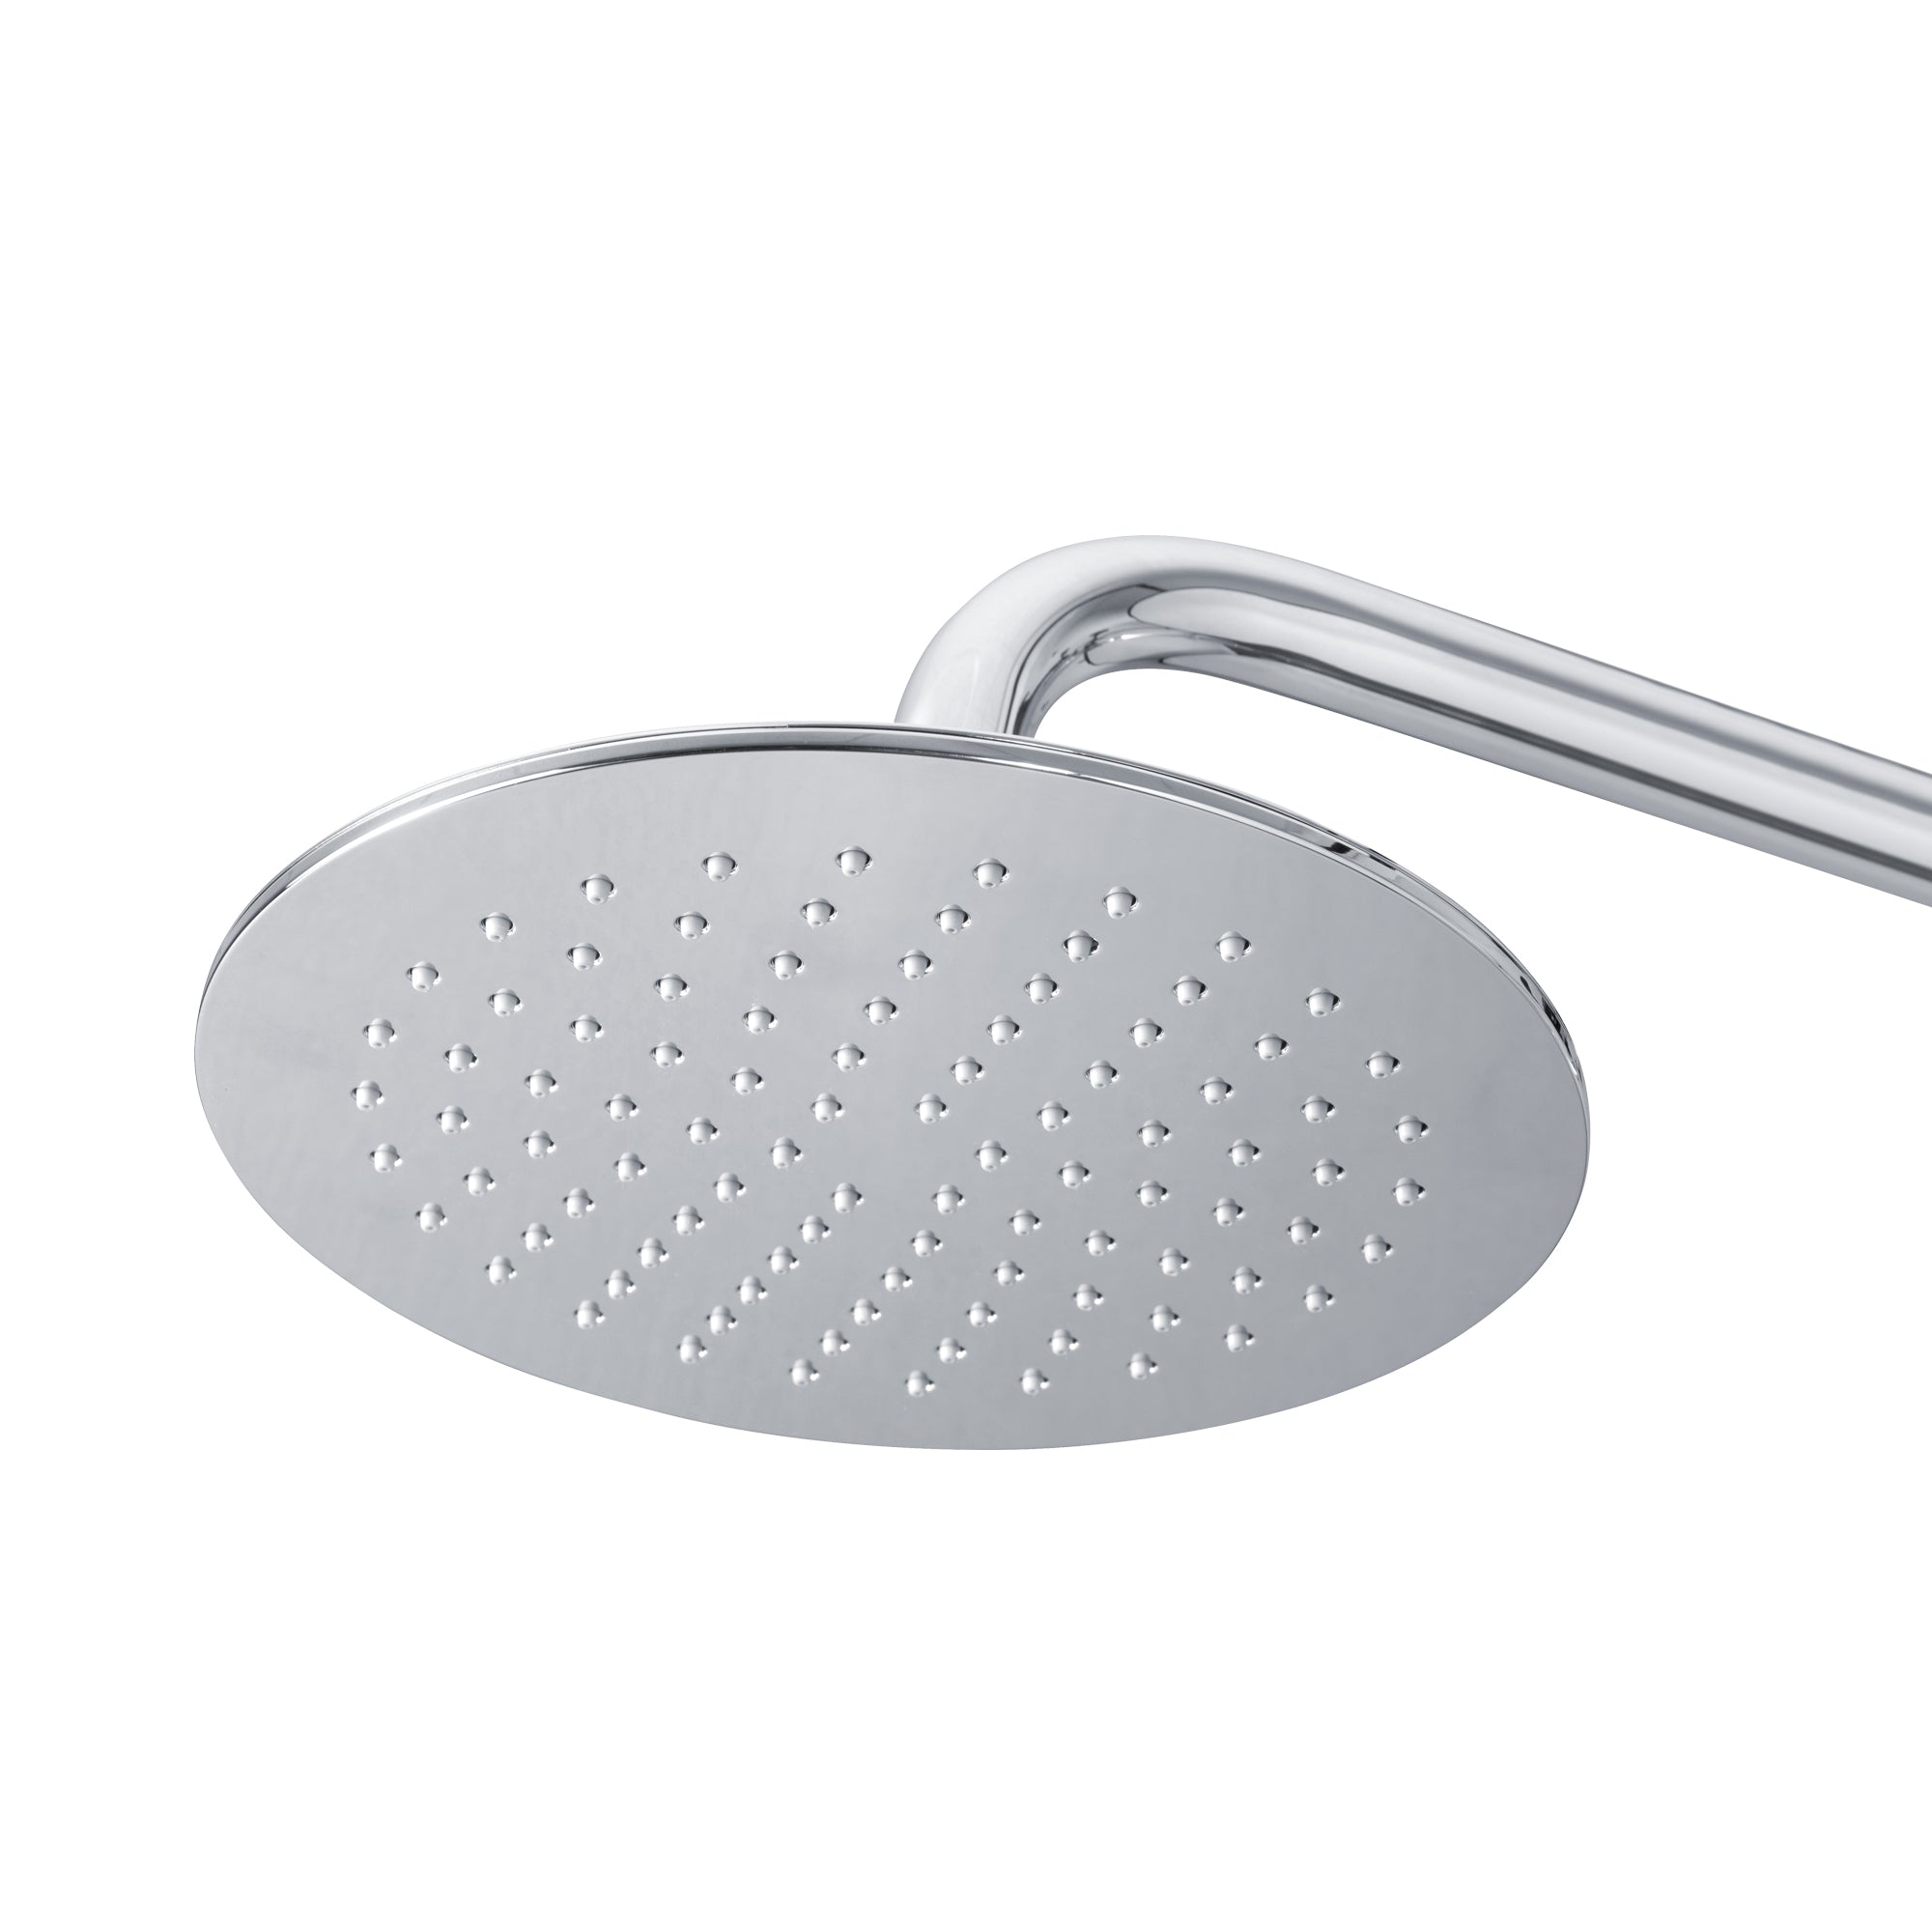 PULSE ShowerSpas Shower System - Aquarius Shower System - All brass construction in Chrome finish - with 8" Rain showerhead with soft tips, hand shower with 59" double-interlocking stainless steel hose and Magnetic hand shower holder - 1052 - Vital Hydrotherapy